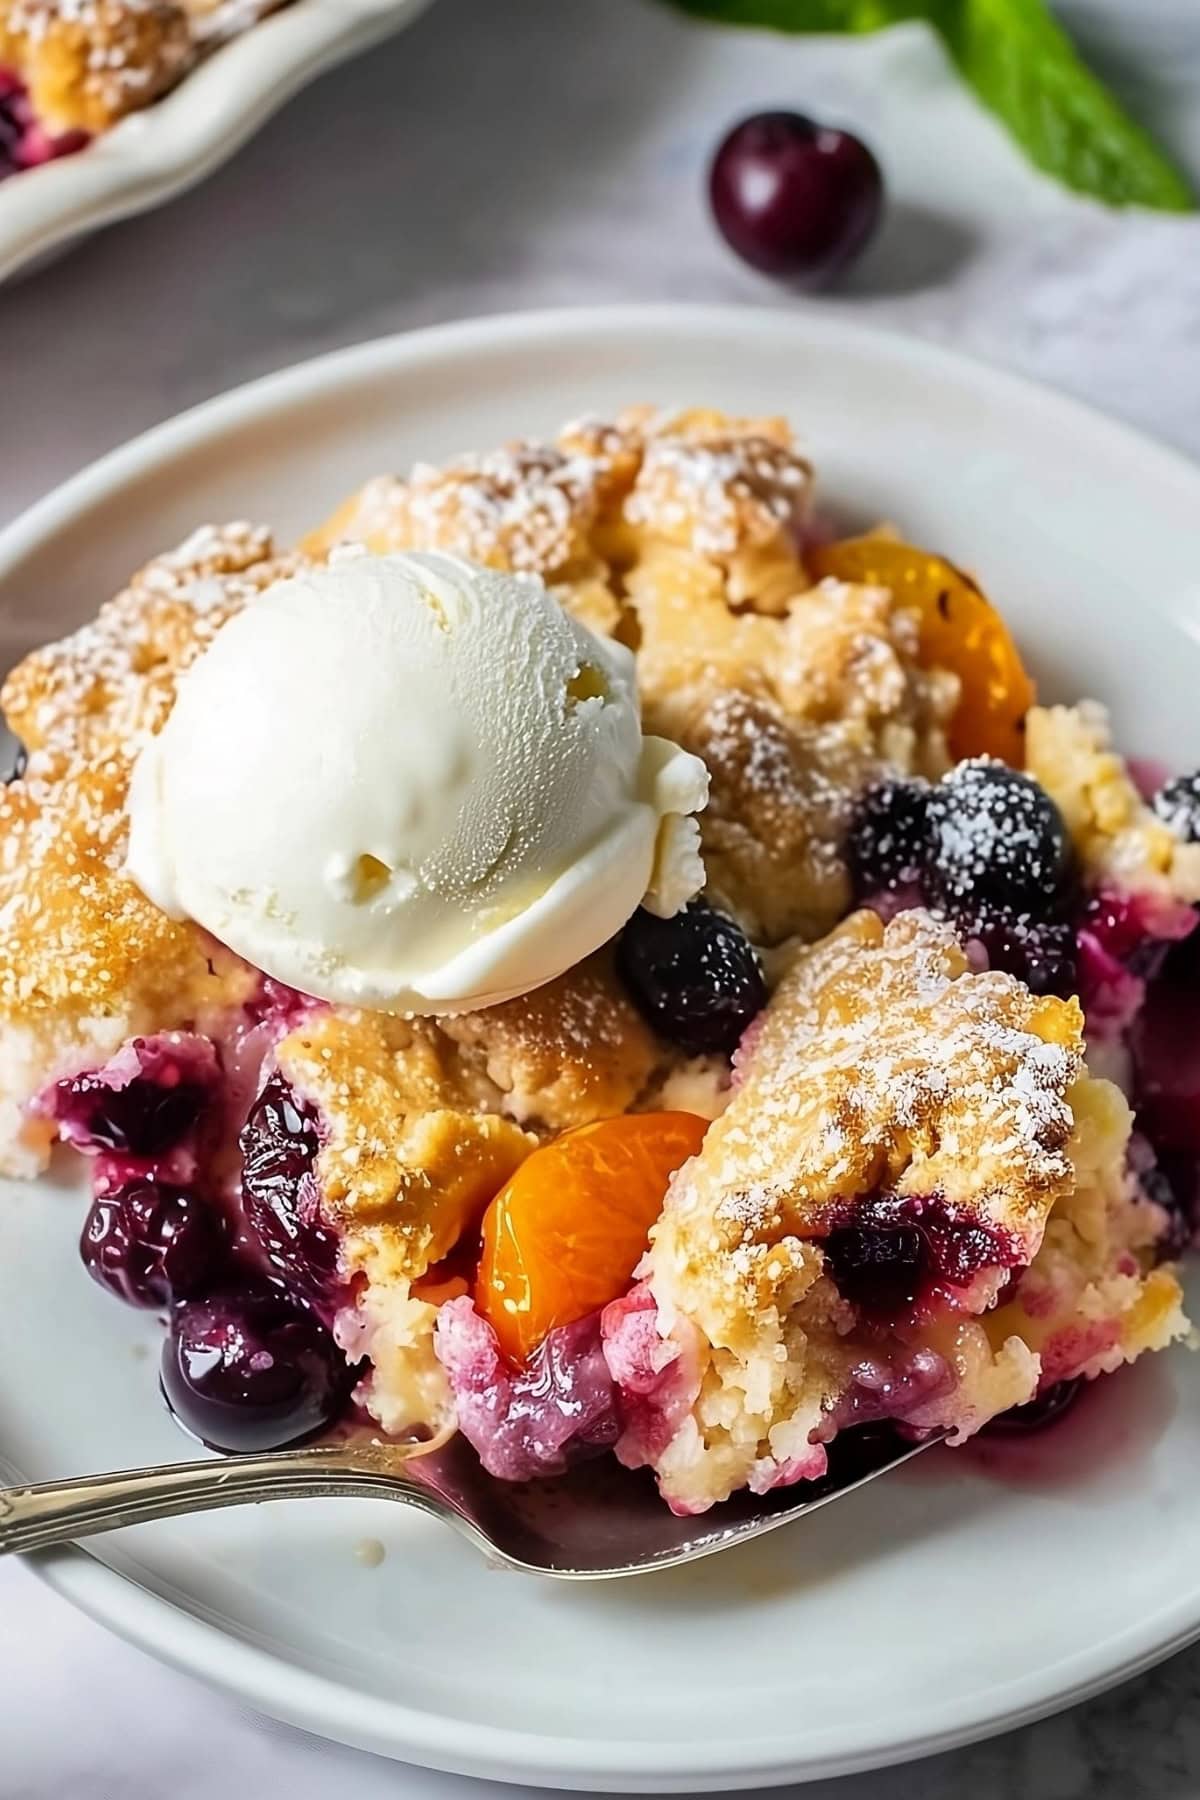 Peach and blueberry cobbler serving with vanilla ice cream in a plate topped with vanilla ice cream.